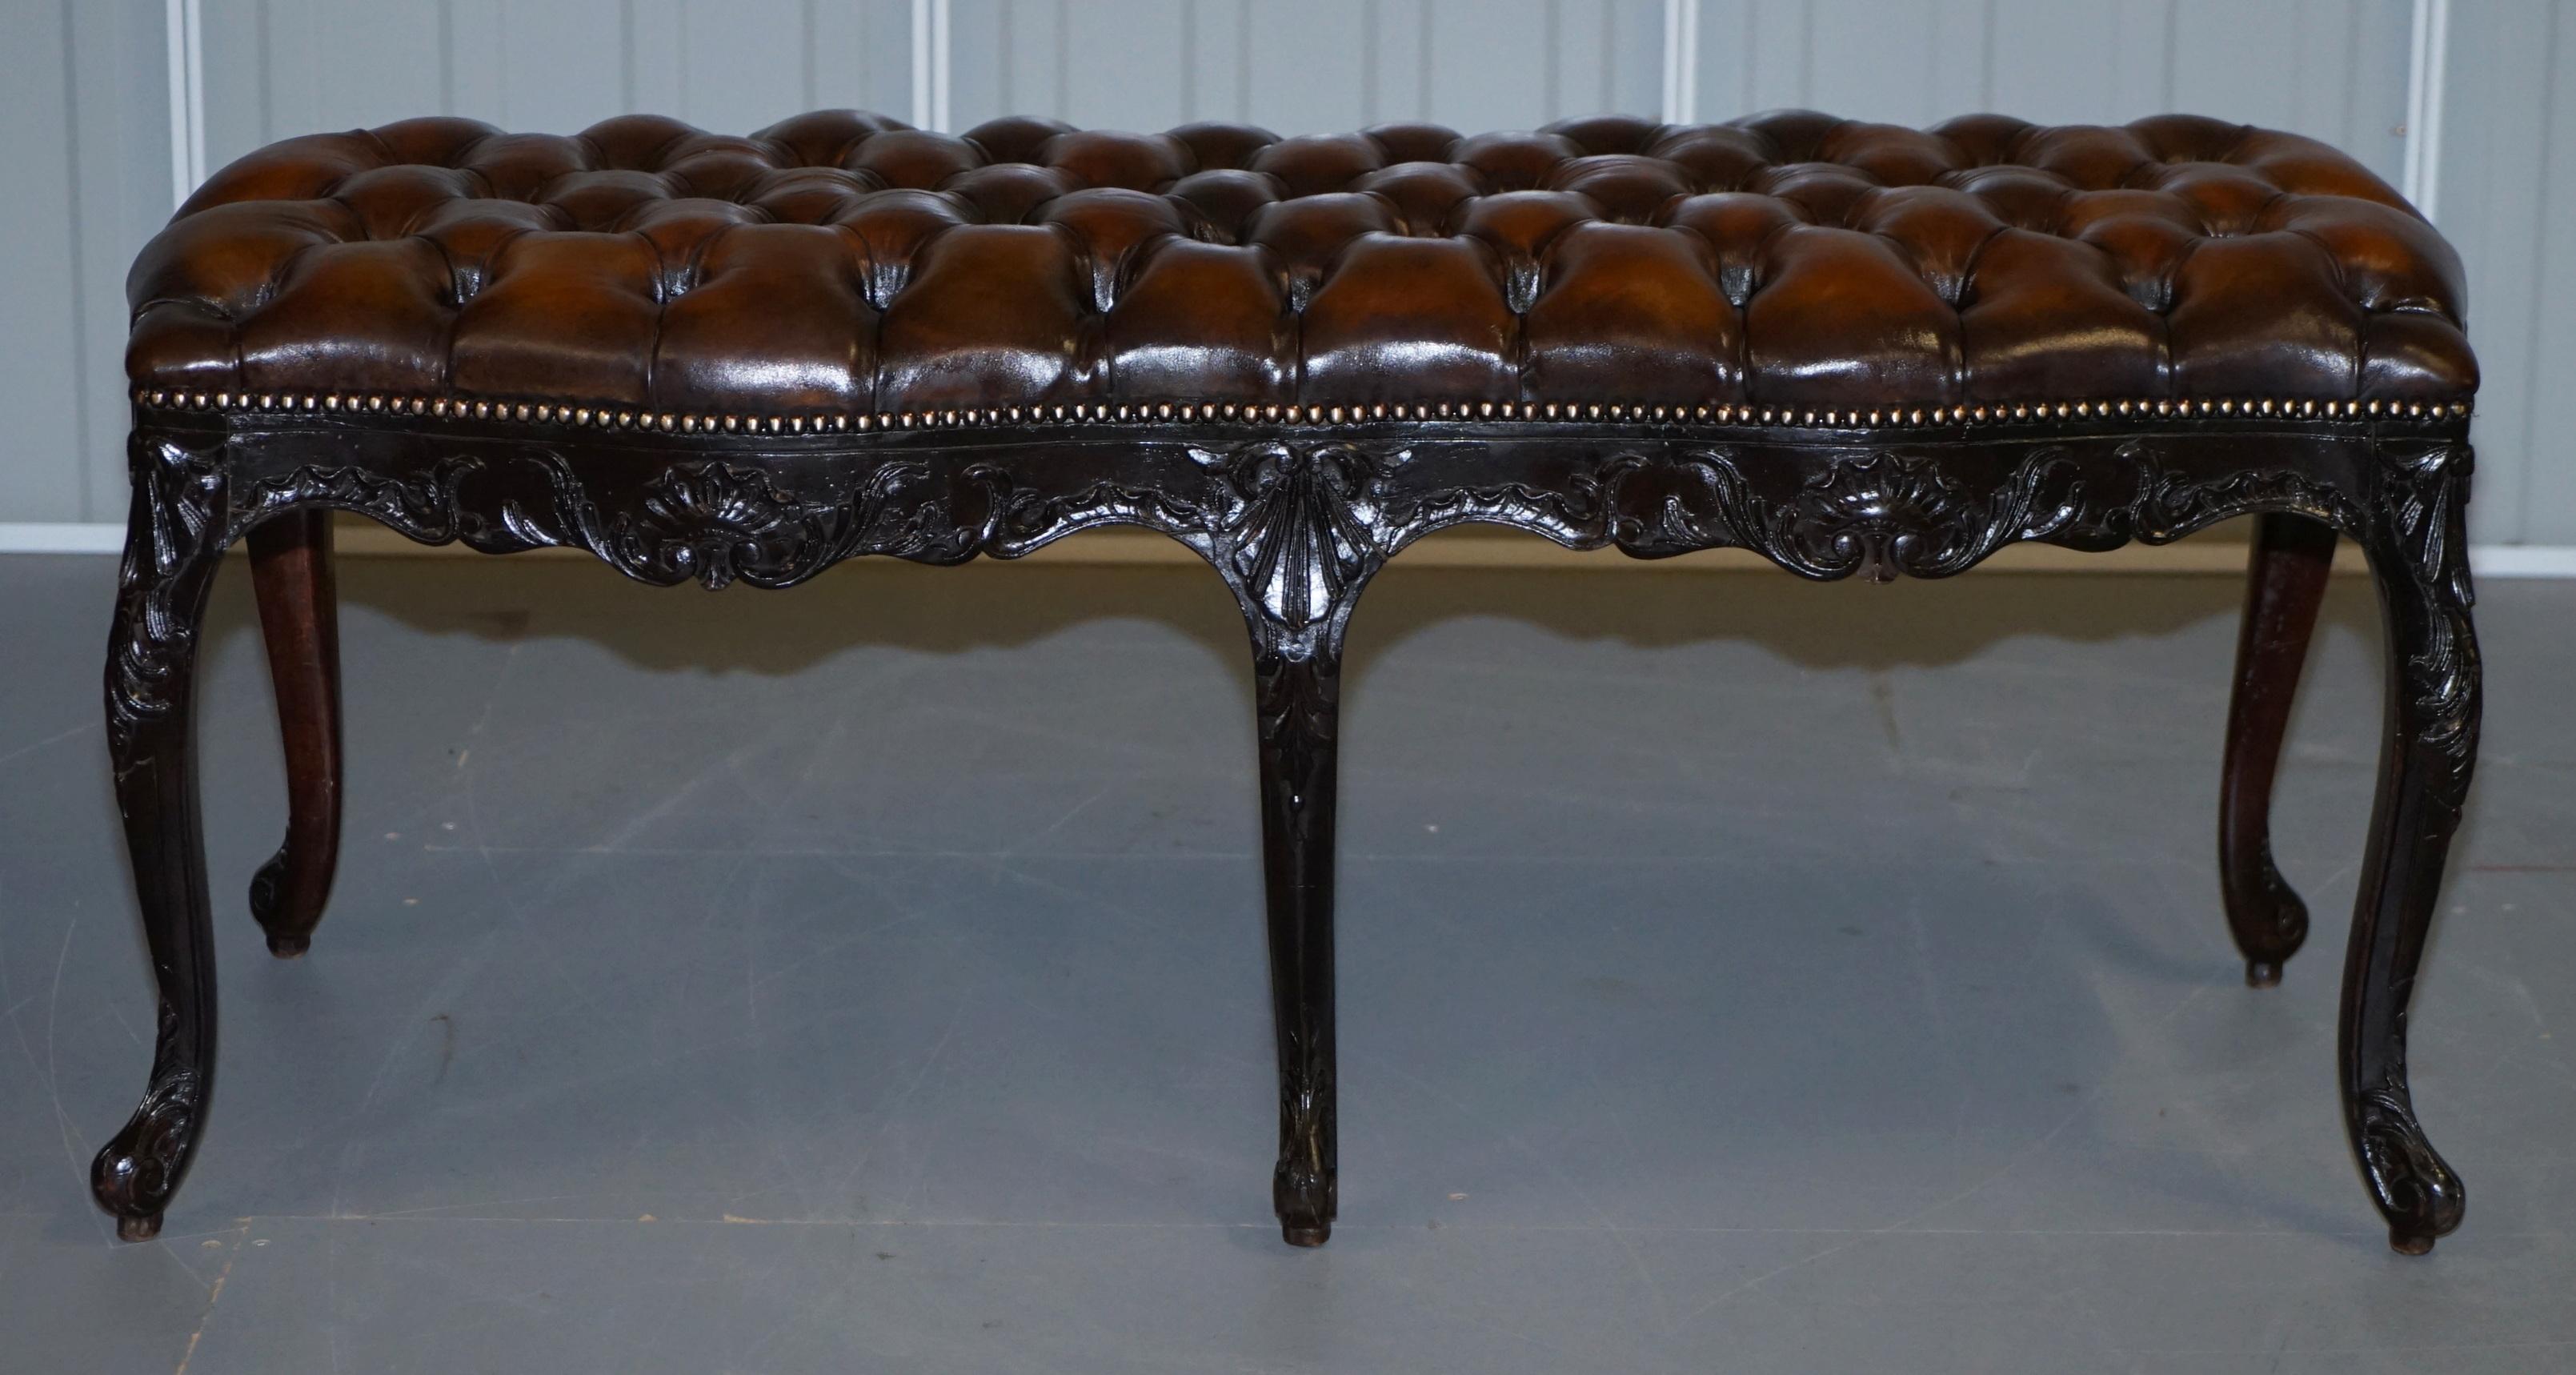 Fully Restored Victorian Chesterfield Brown Leather Piano Stool Bench 2 Person 3